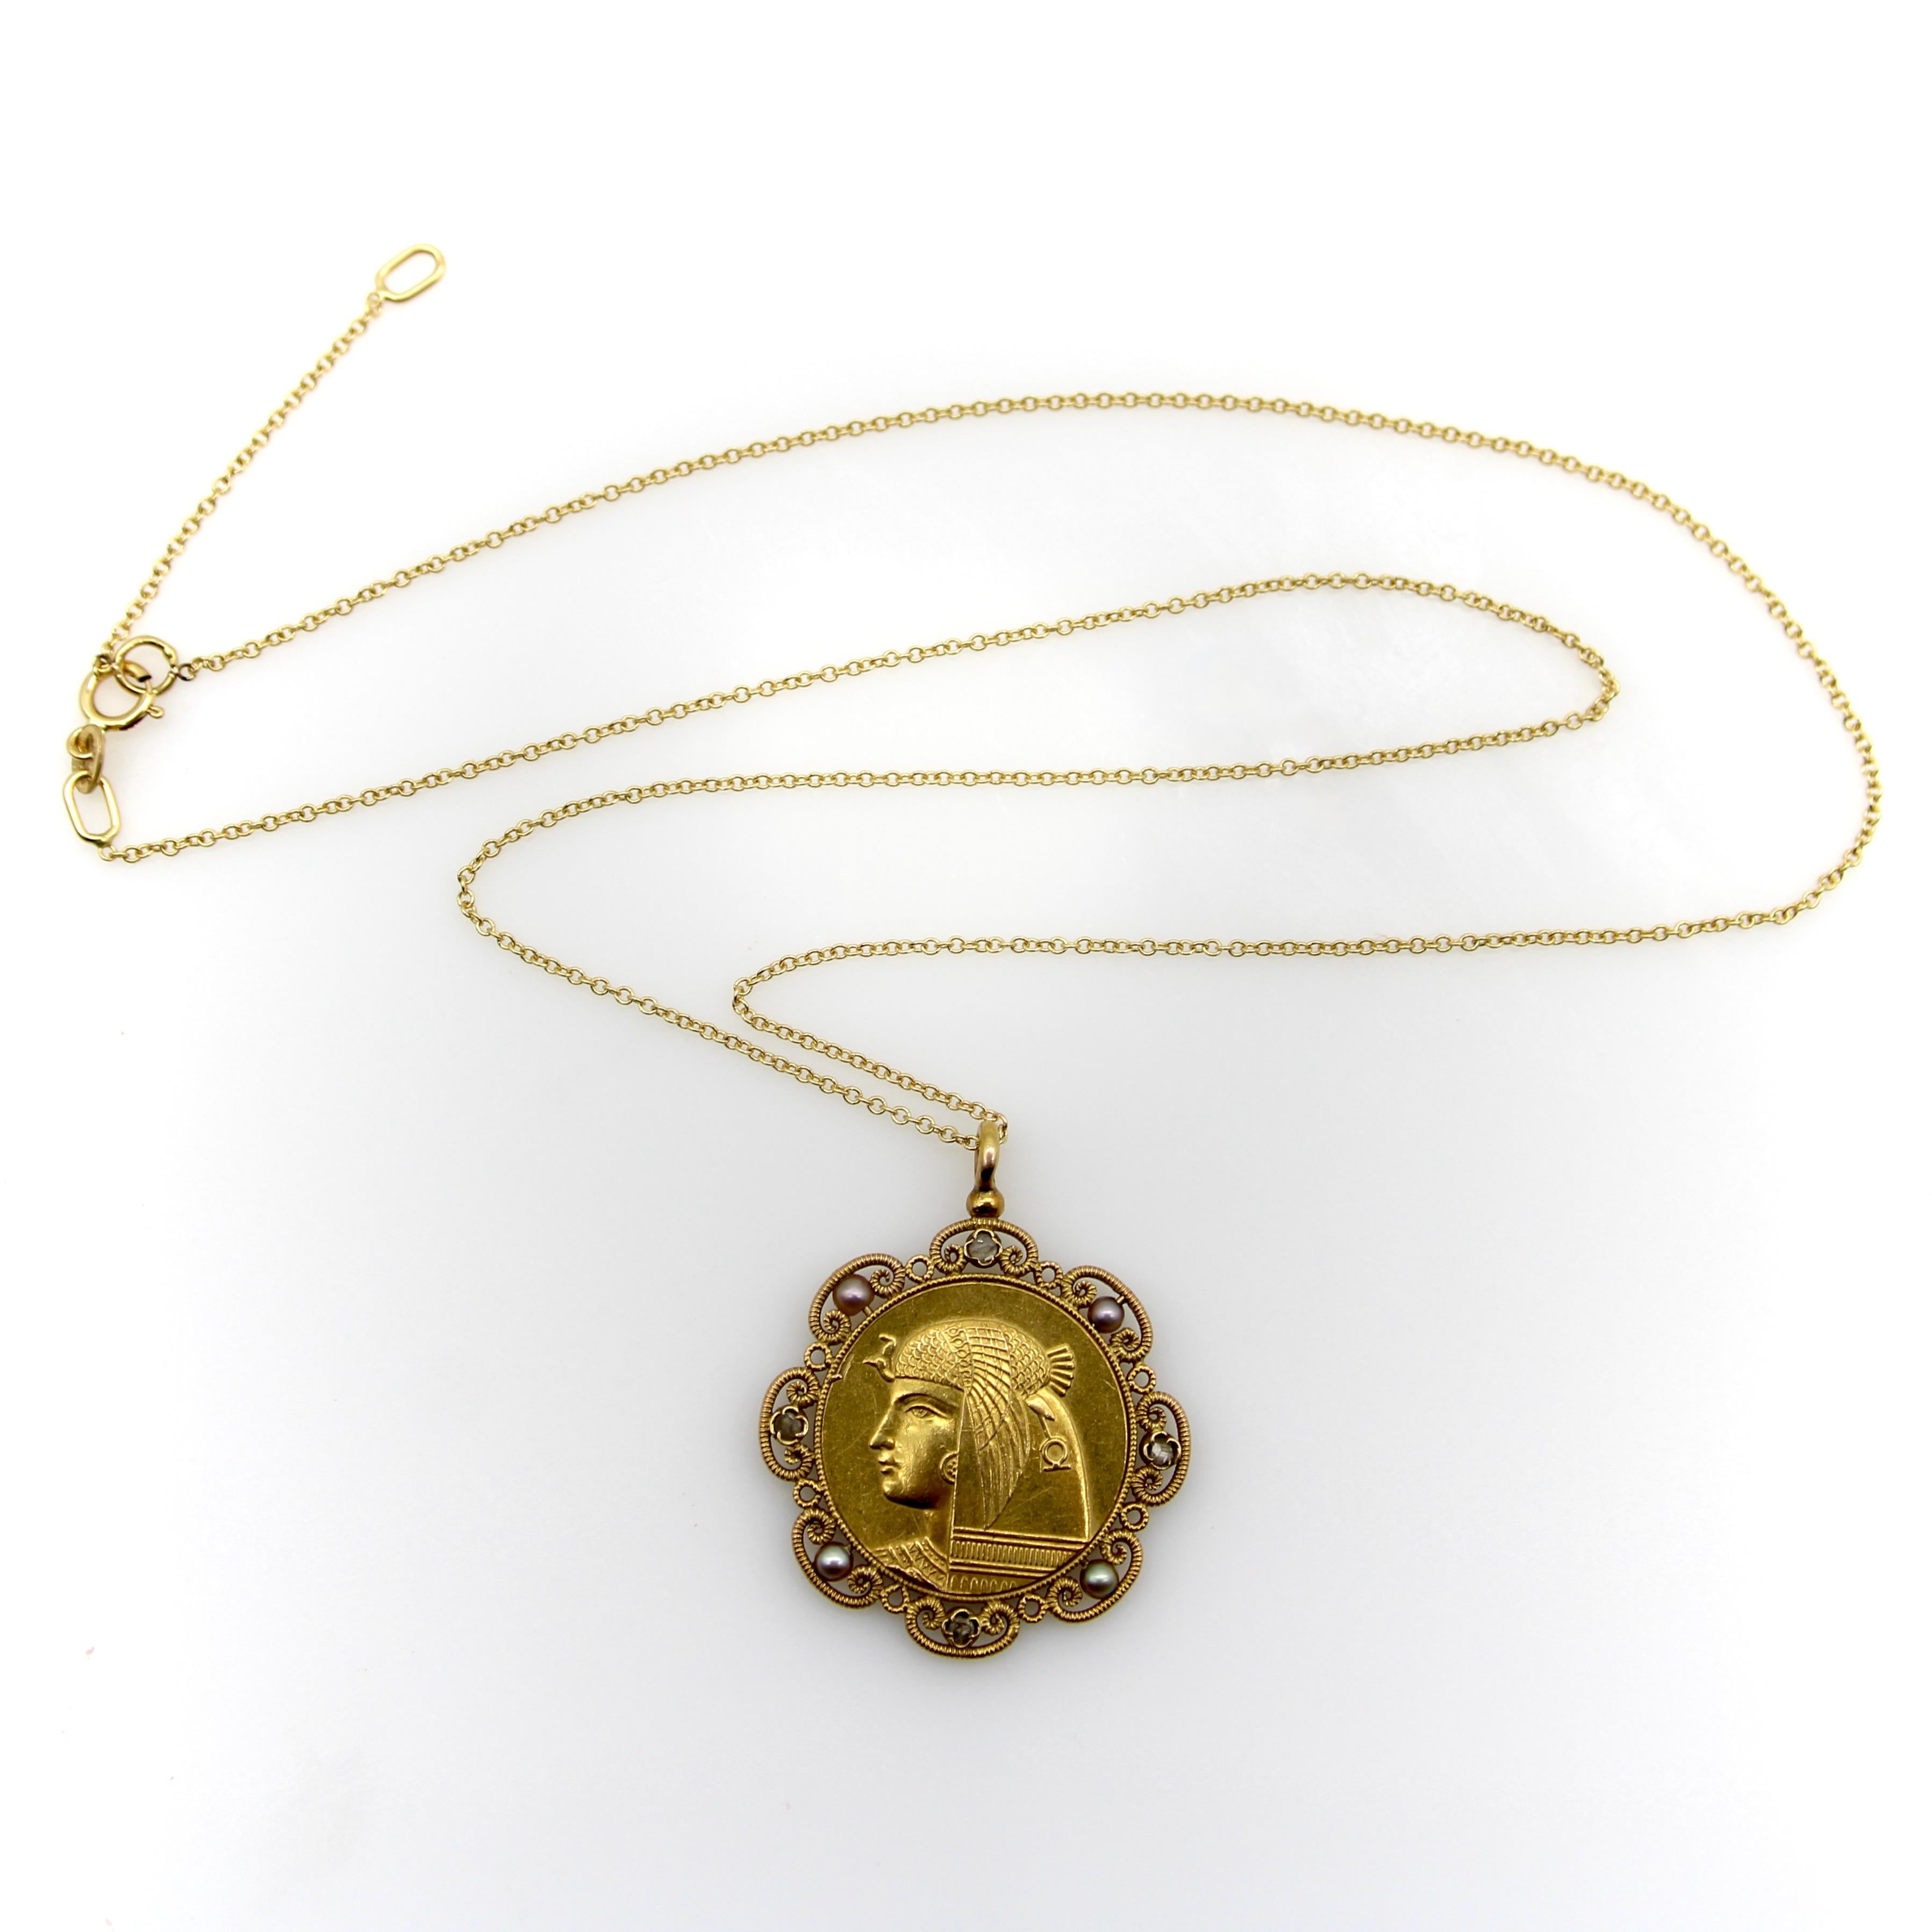 This 18k gold two-sided French Victorian Egyptian Revival pendant necklace features the portrait of the goddess Nekhbet, surrounded by a lace-like halo of pearls and Rose Cut diamonds. Circa the 1880’s, the portrait is exquisite and the detail is